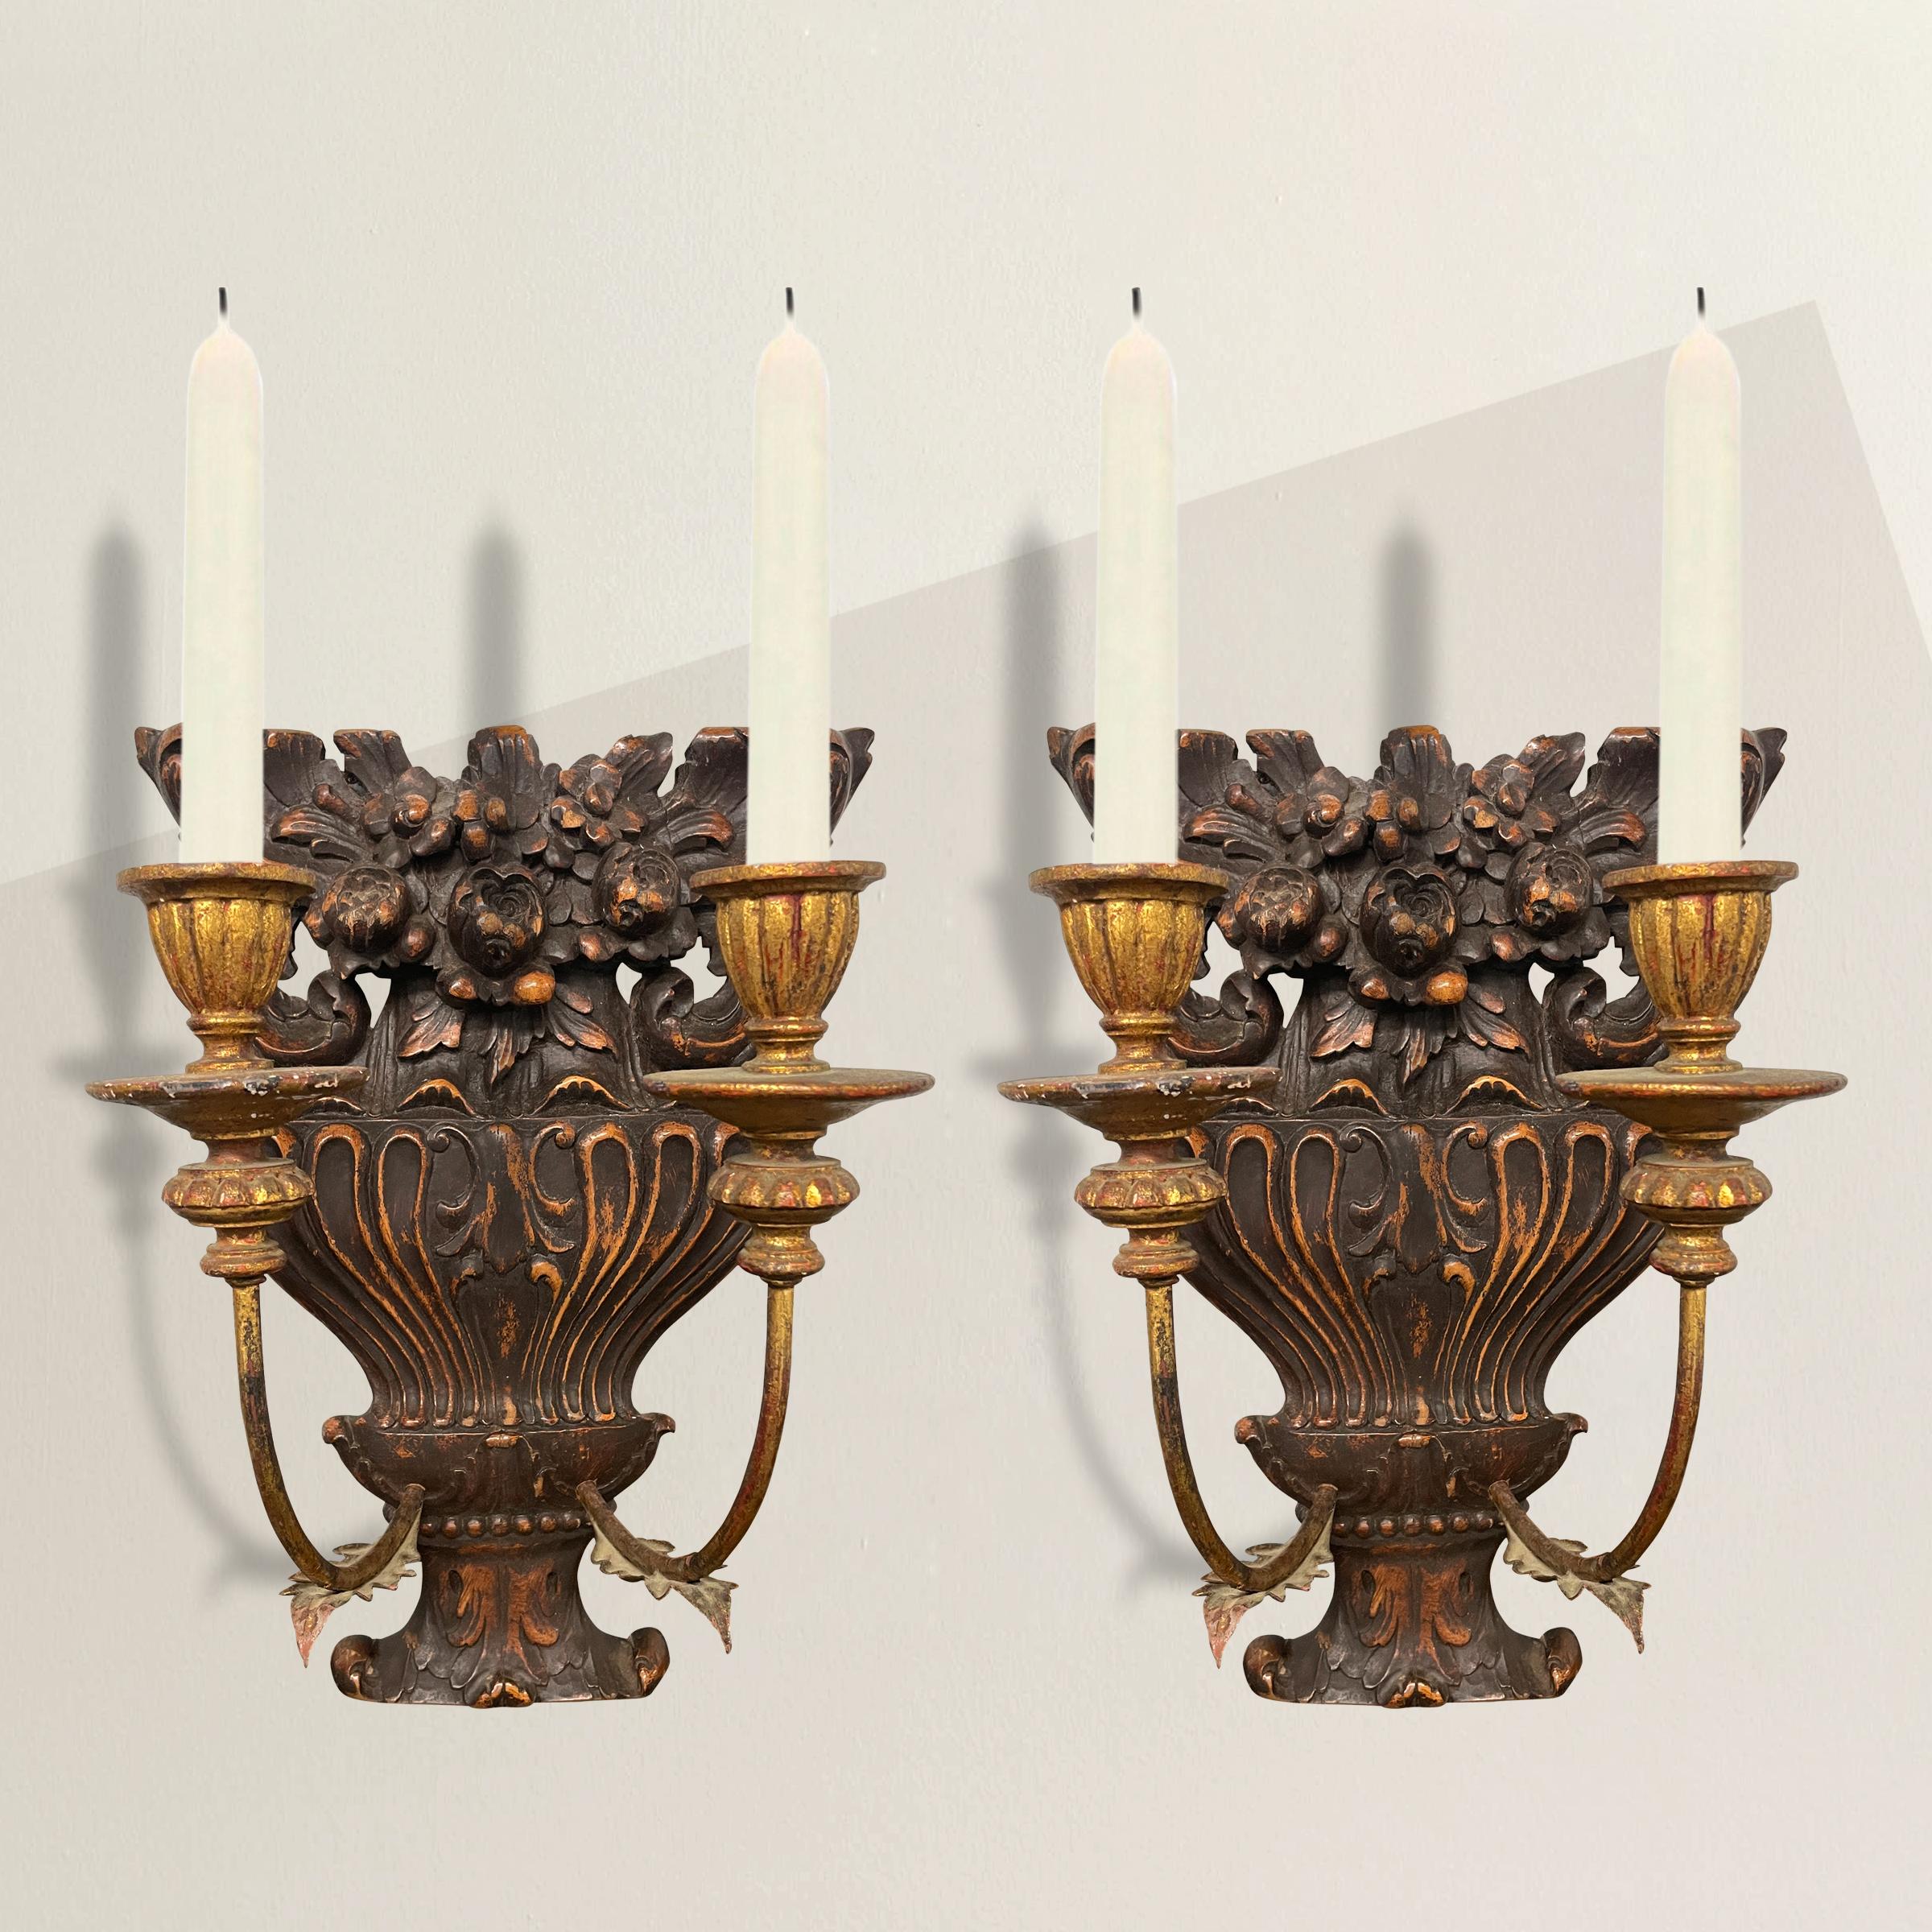 A charming pair of mid-19th century French candle sconces with carved floral-potted urn backplates, and gilt metal and wood arms. Sconces could be electrified for an additional fee.